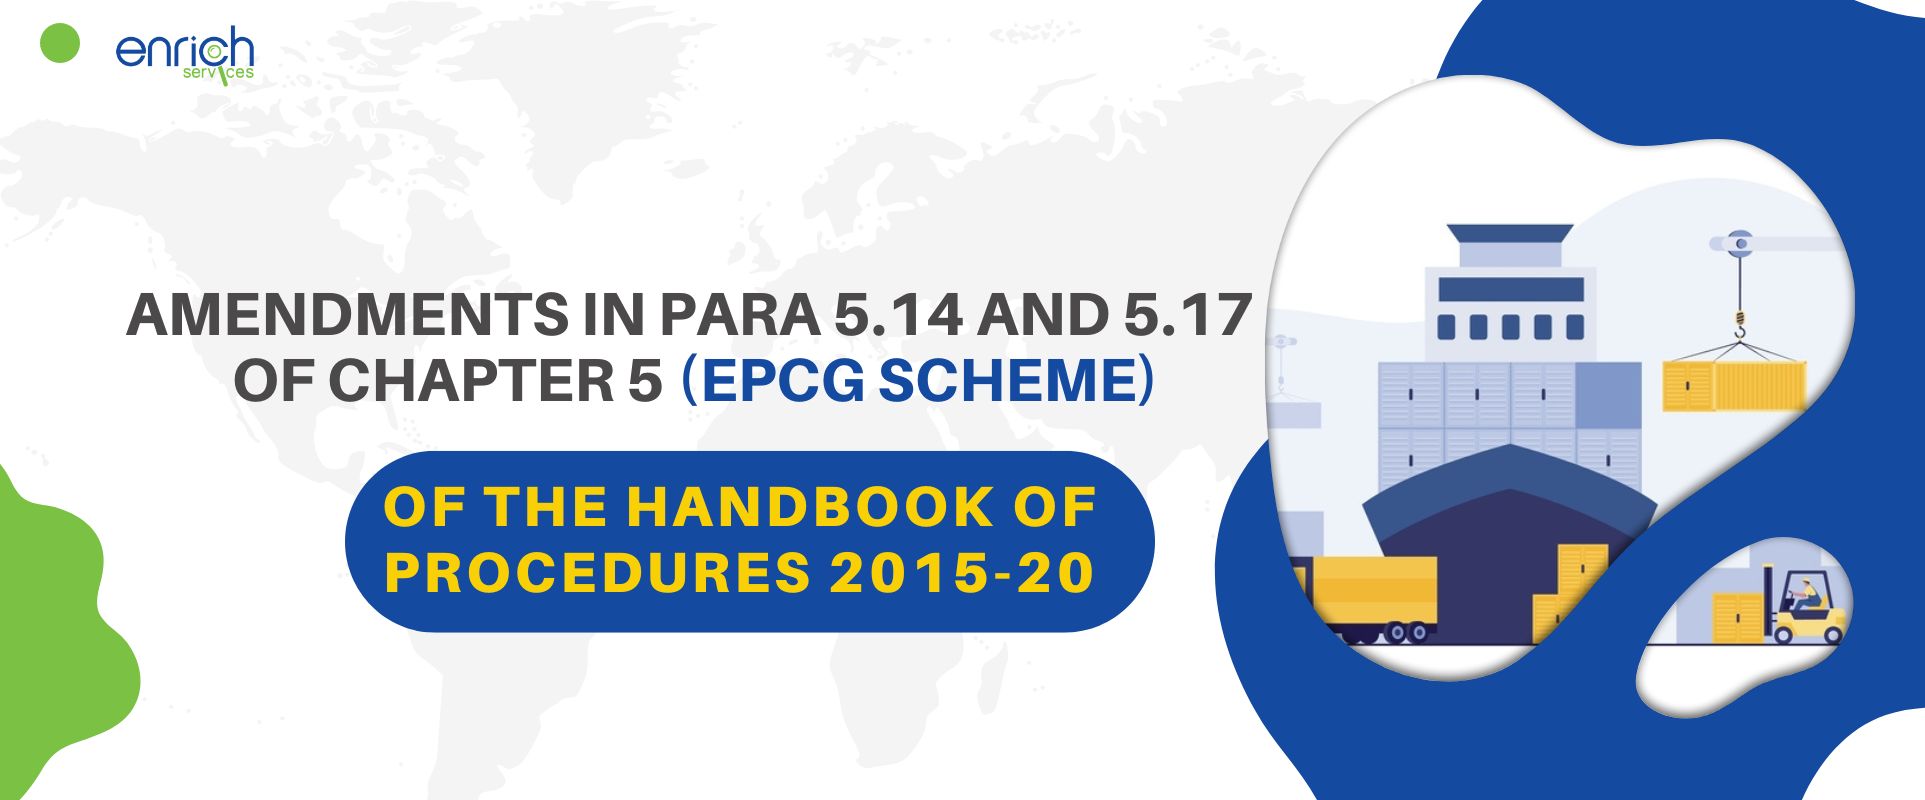 Amendments in Para 5.14 (c) and 5.17 (d) of Chapter 5 (EPCG Scheme) of the Hand Book of Procedures 2015-20